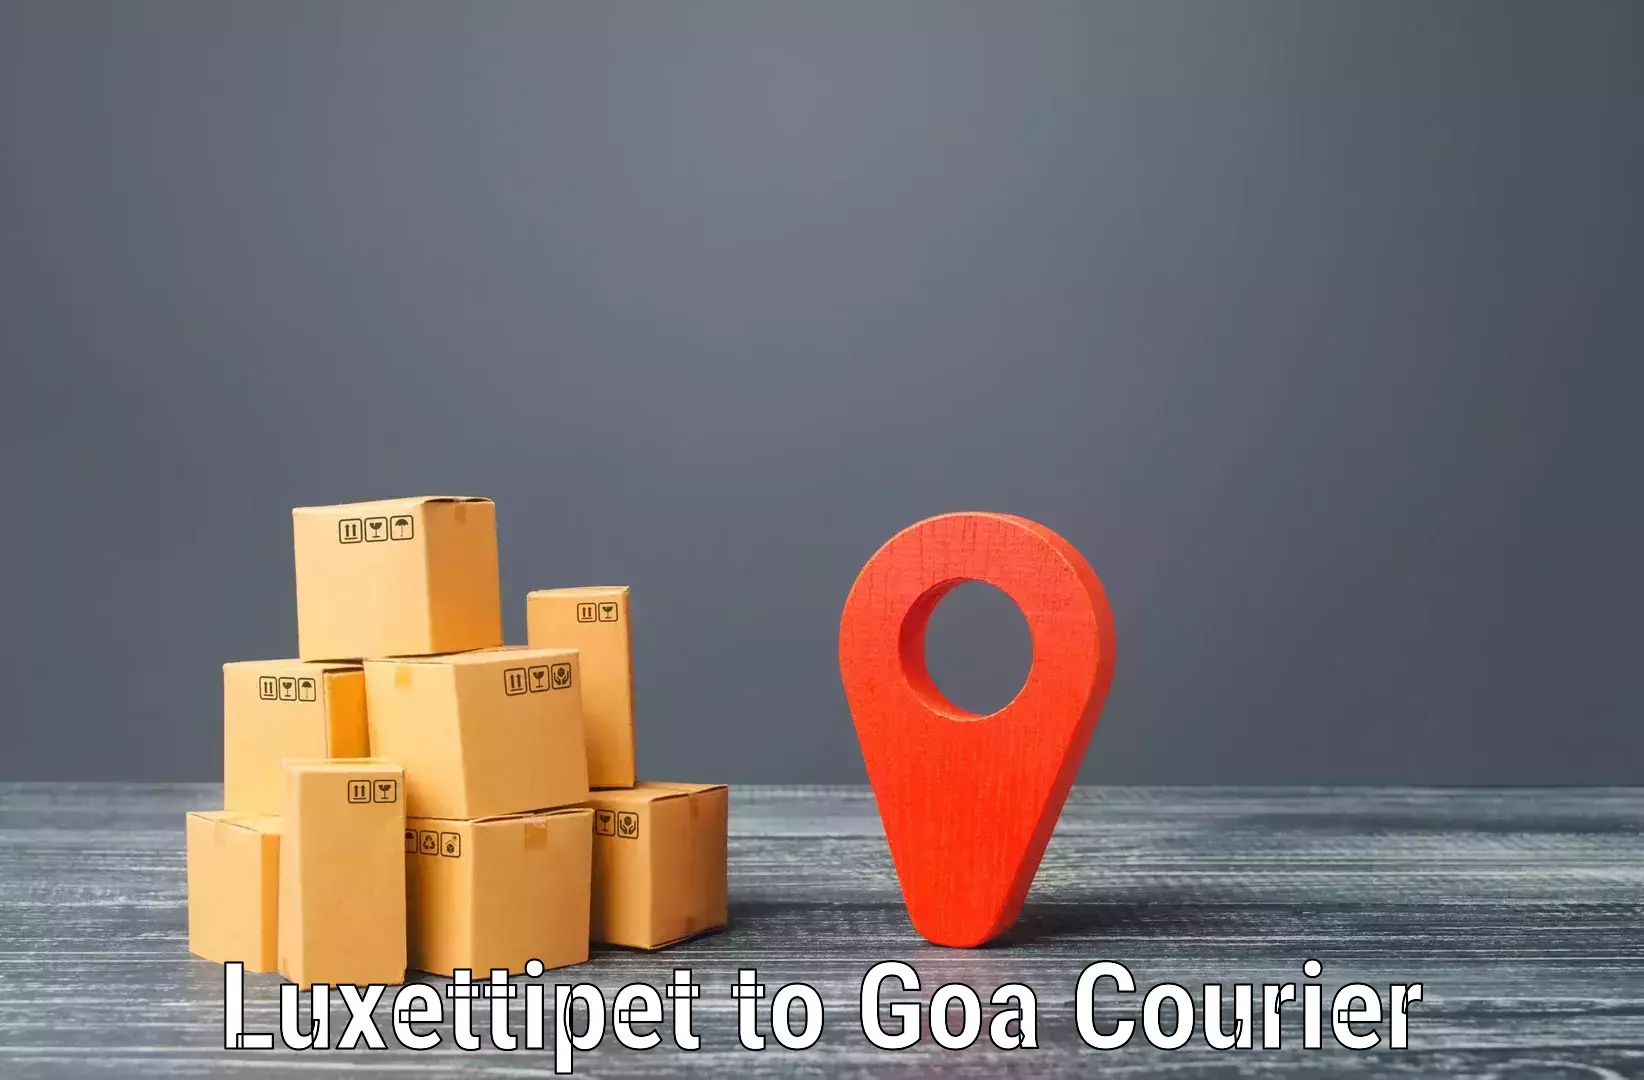 User-friendly courier app Luxettipet to Goa University